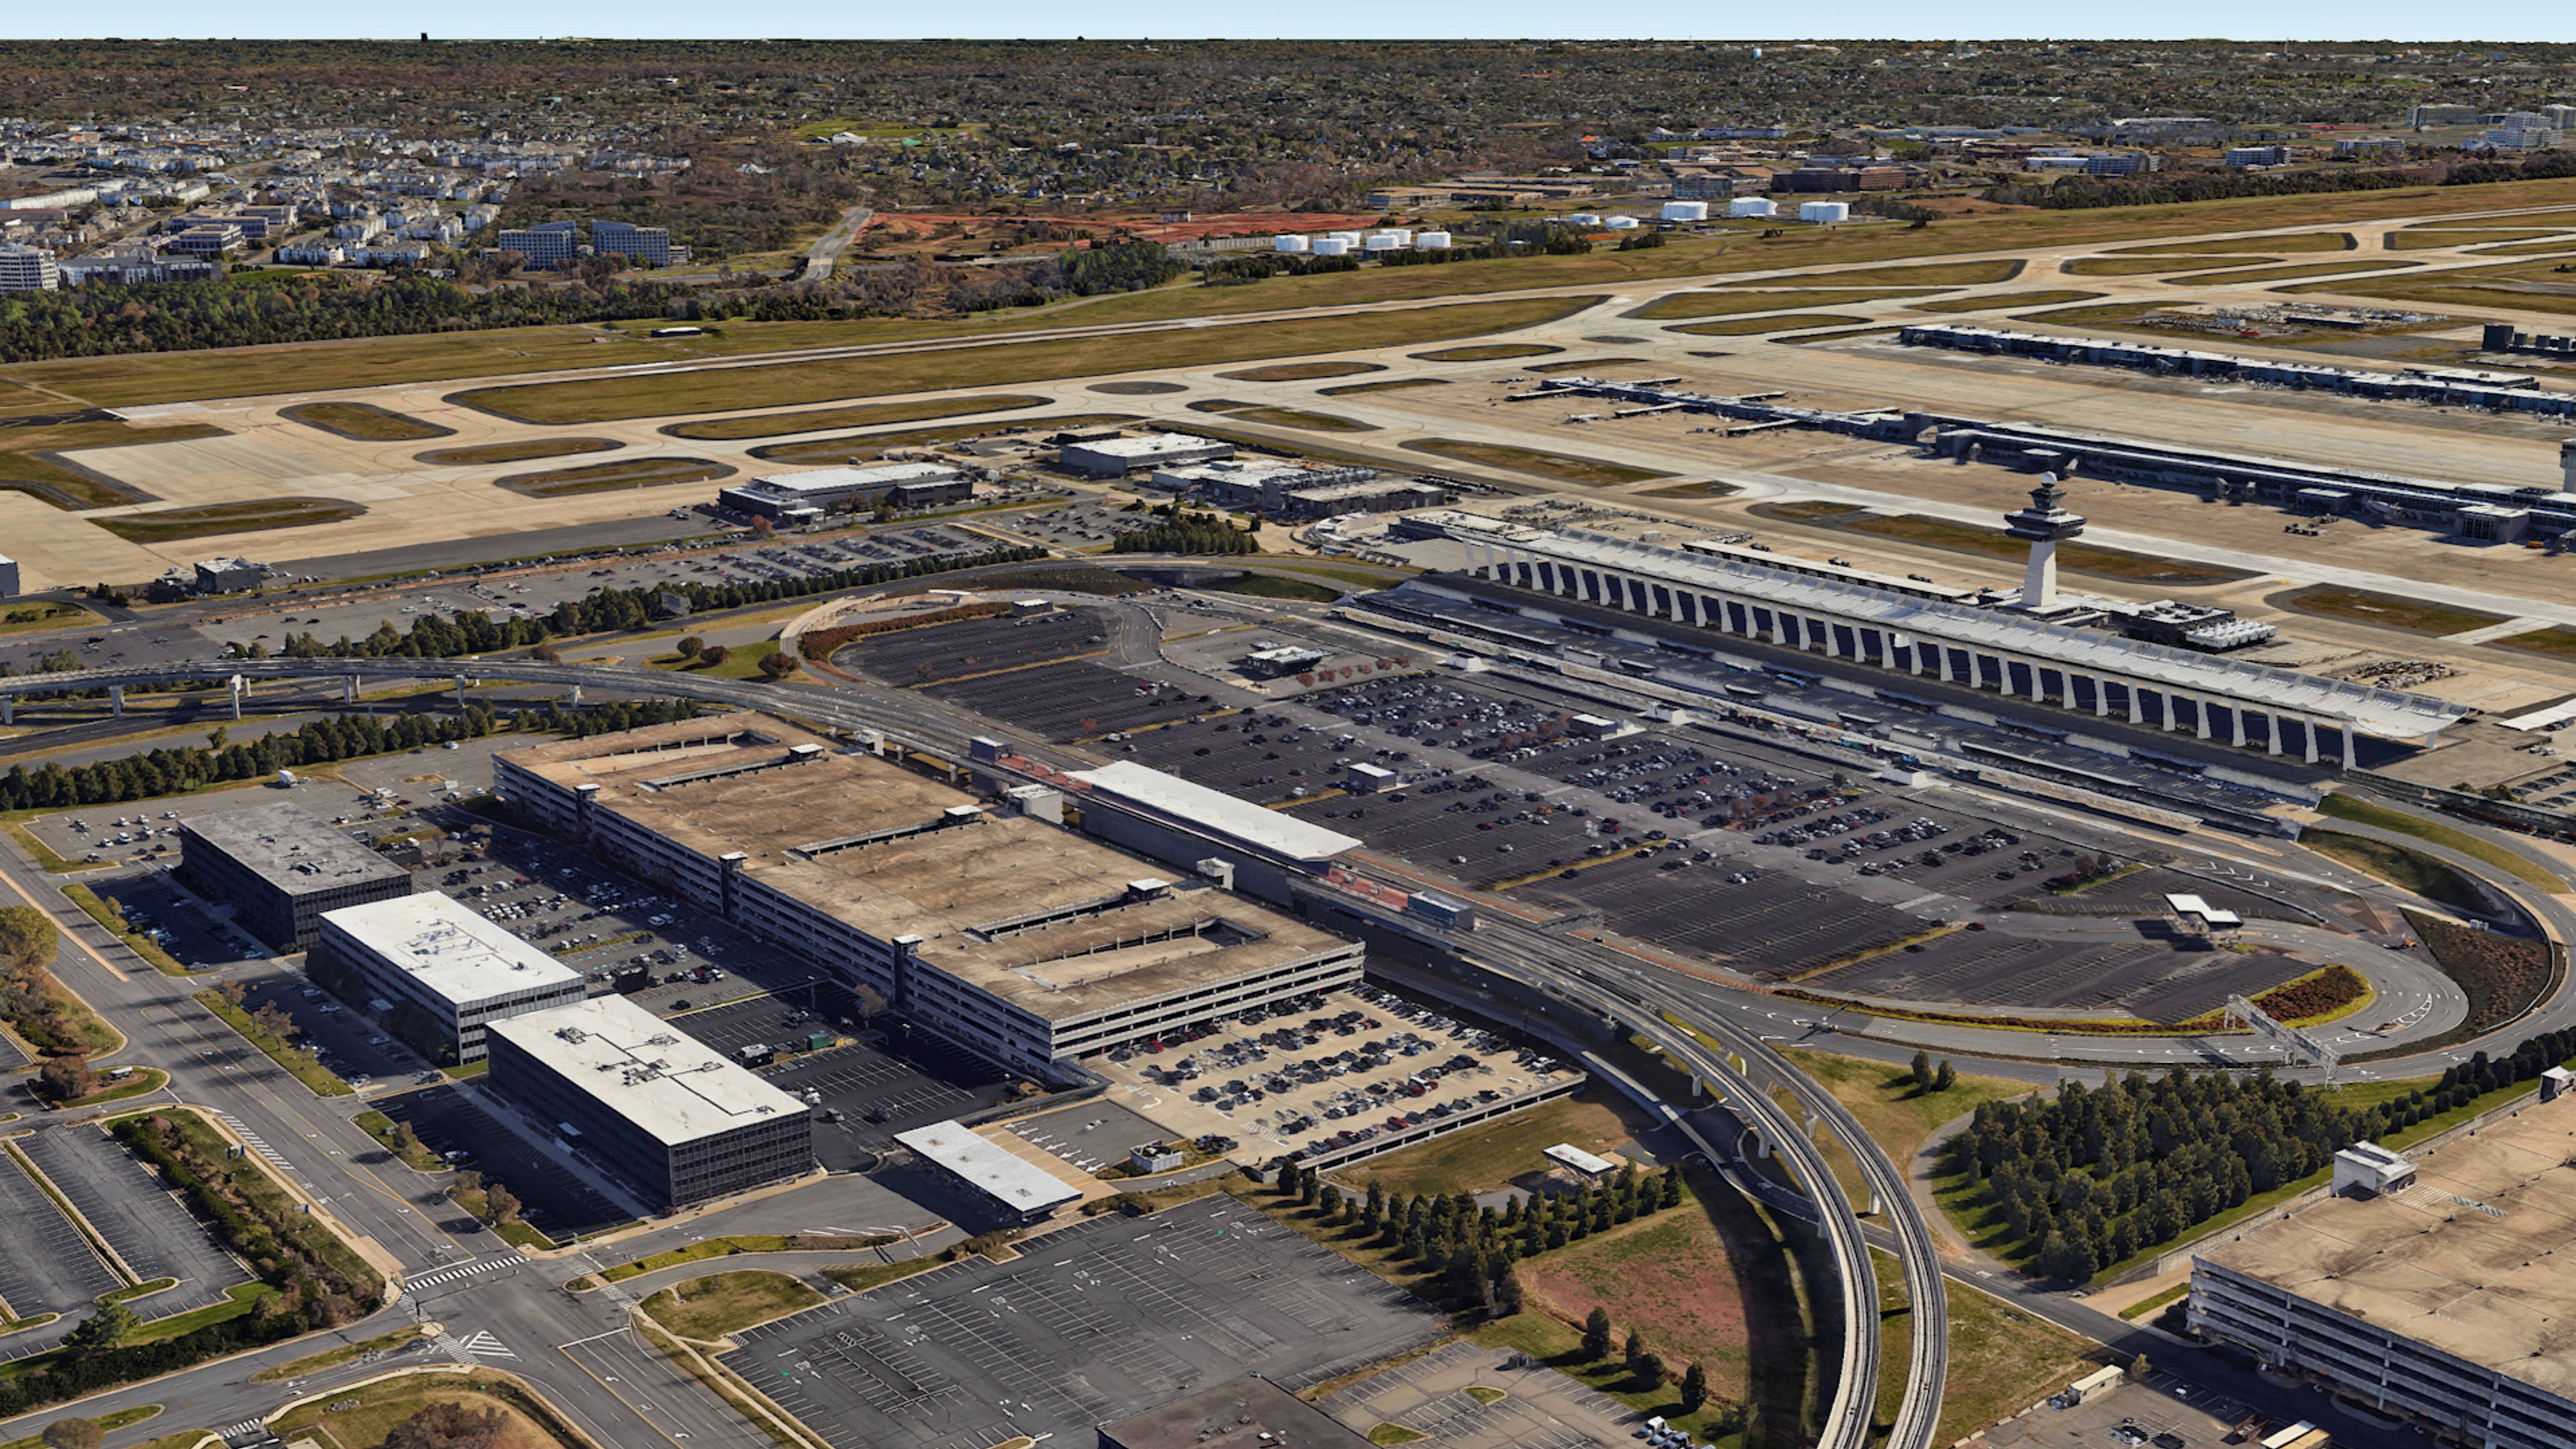  Aerial View of Dulles Airport Parking